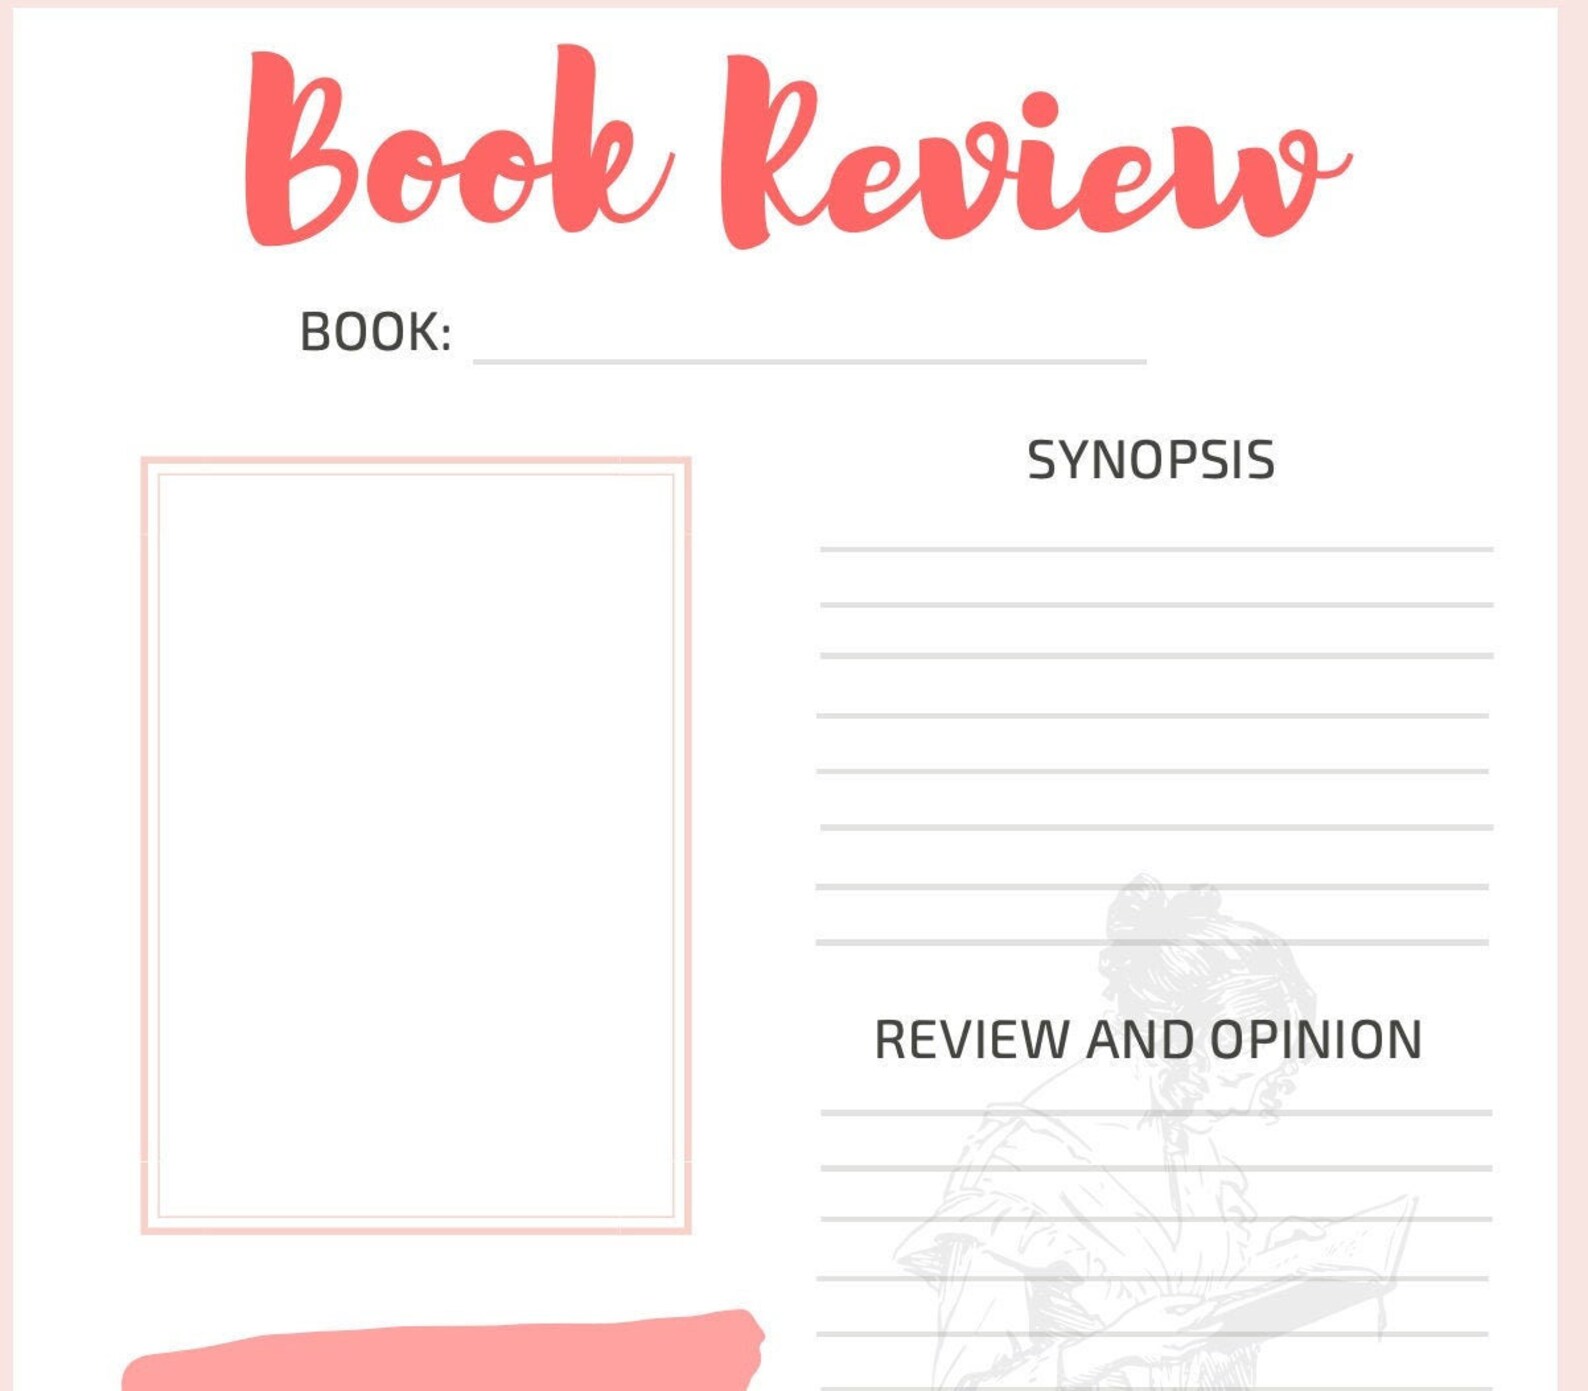 book review journal